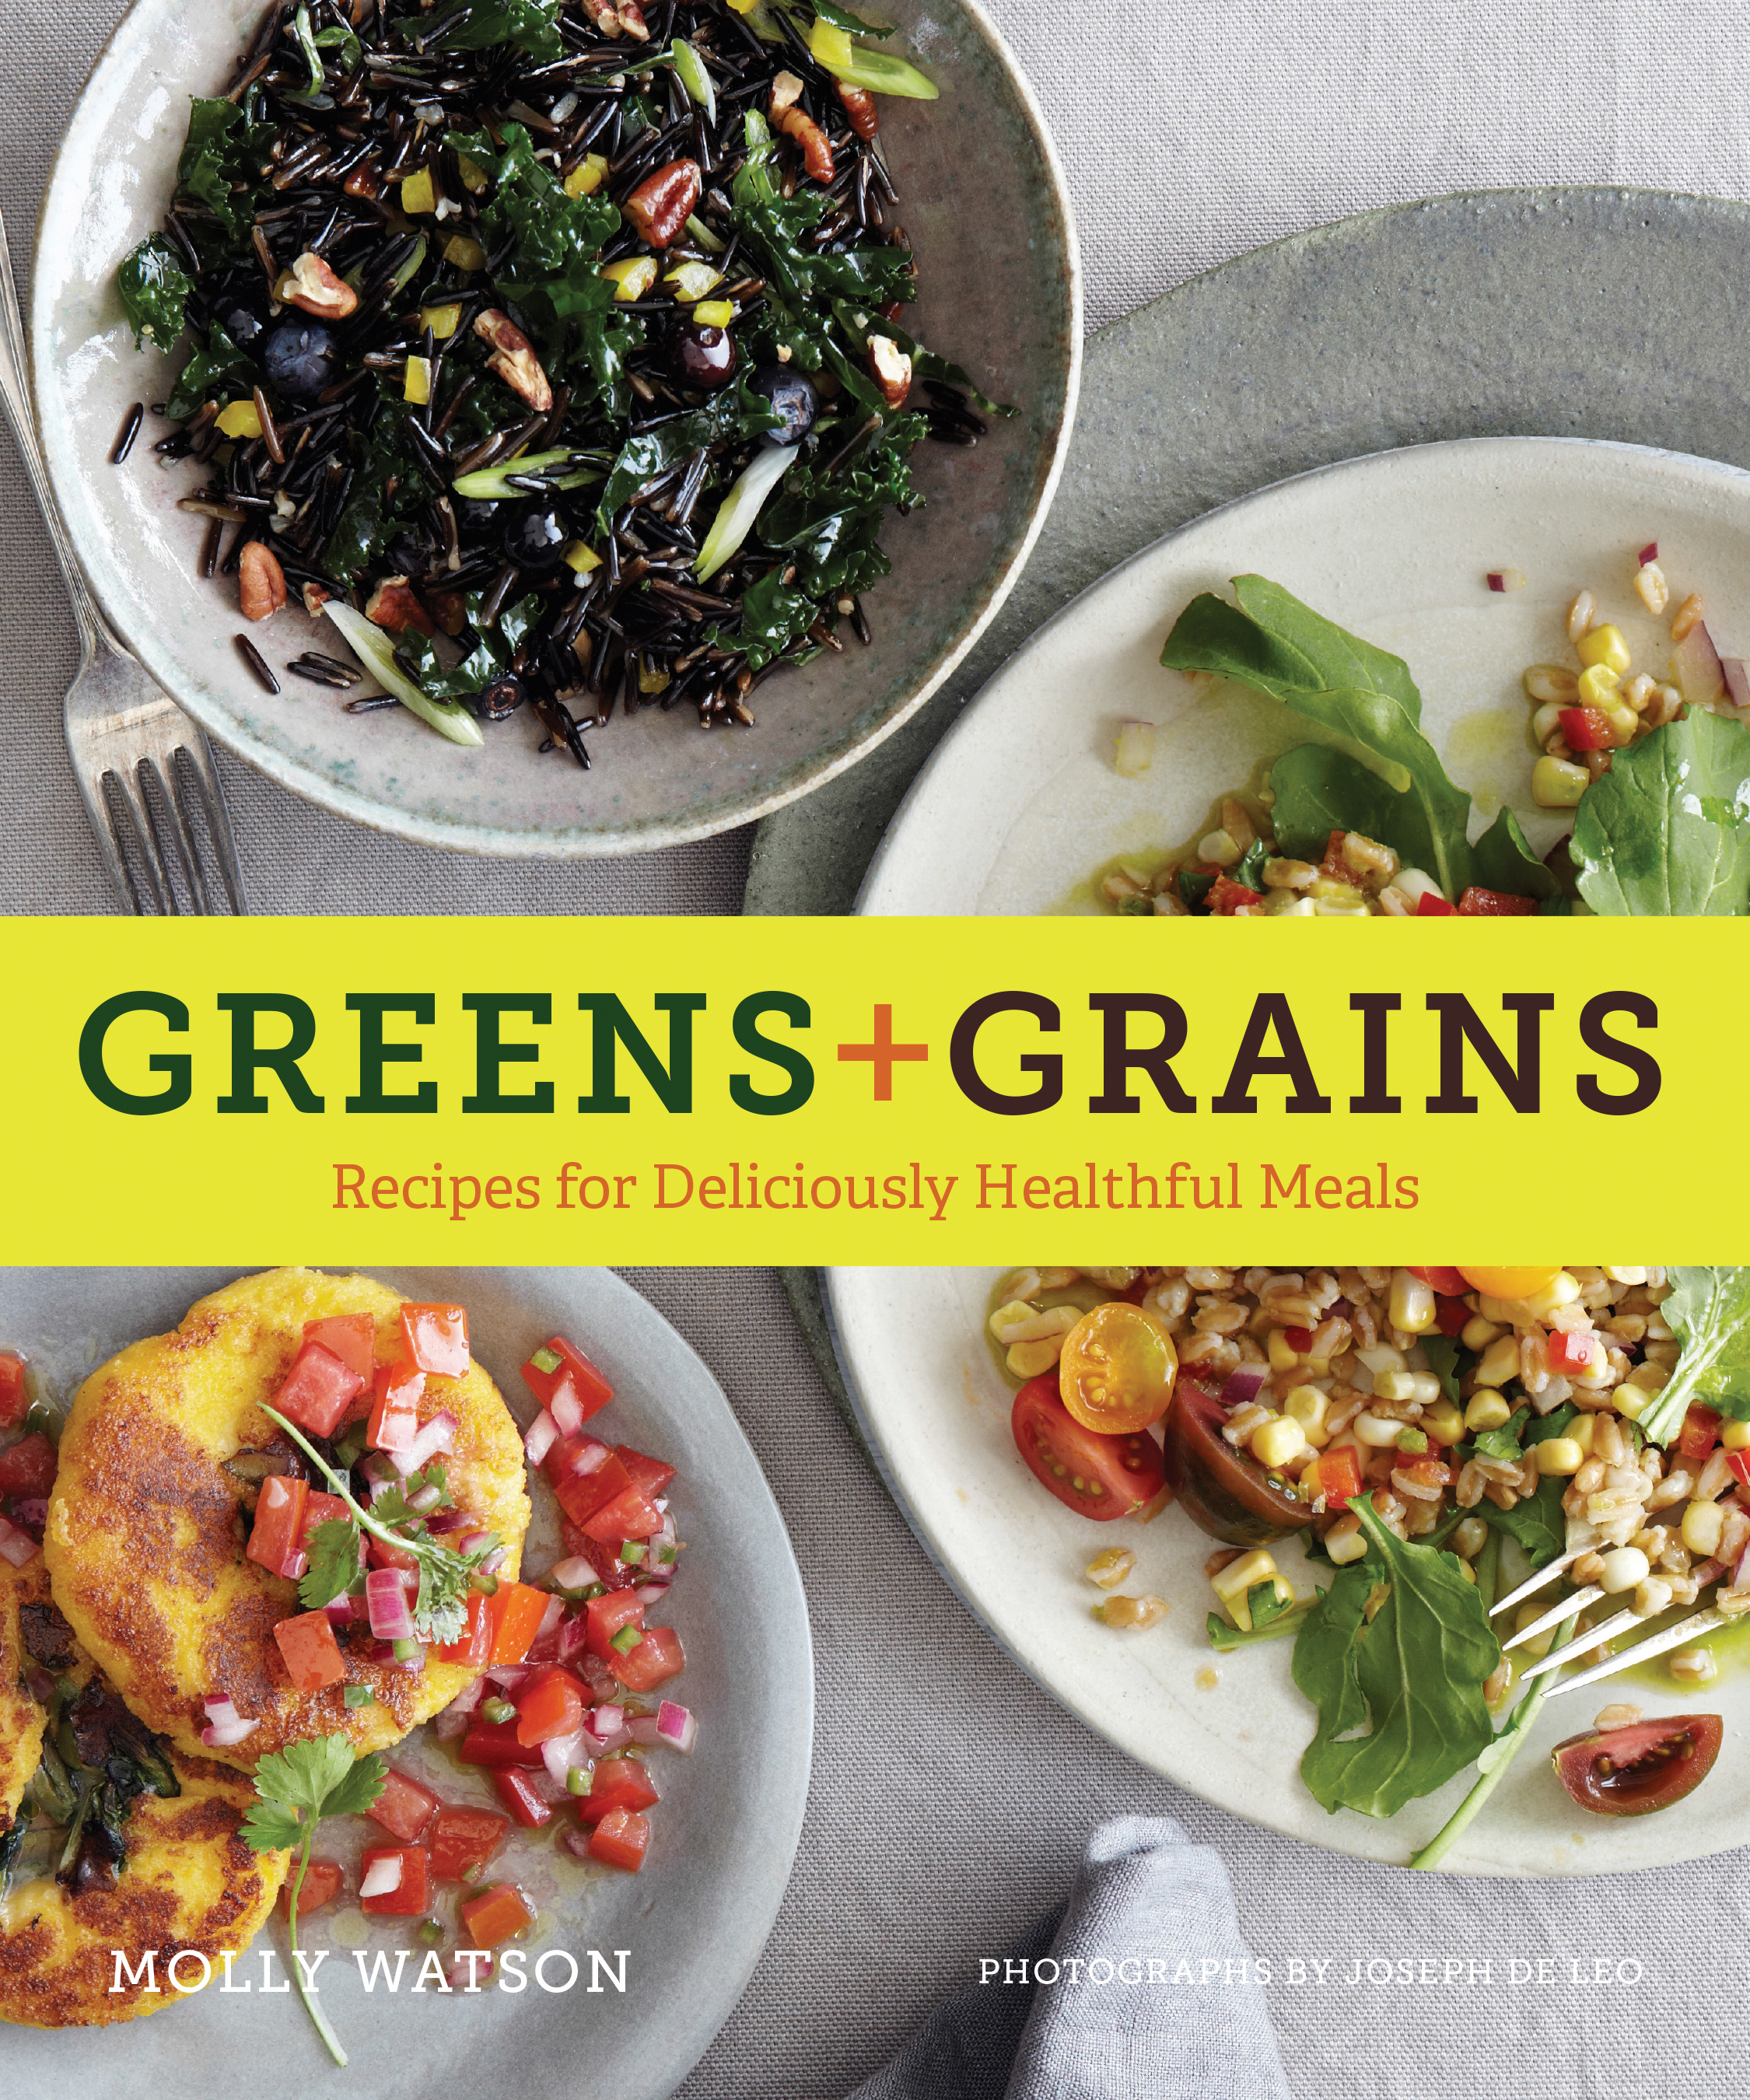 Greens+ Grains: Recipes for Deliciously Healthful Meals